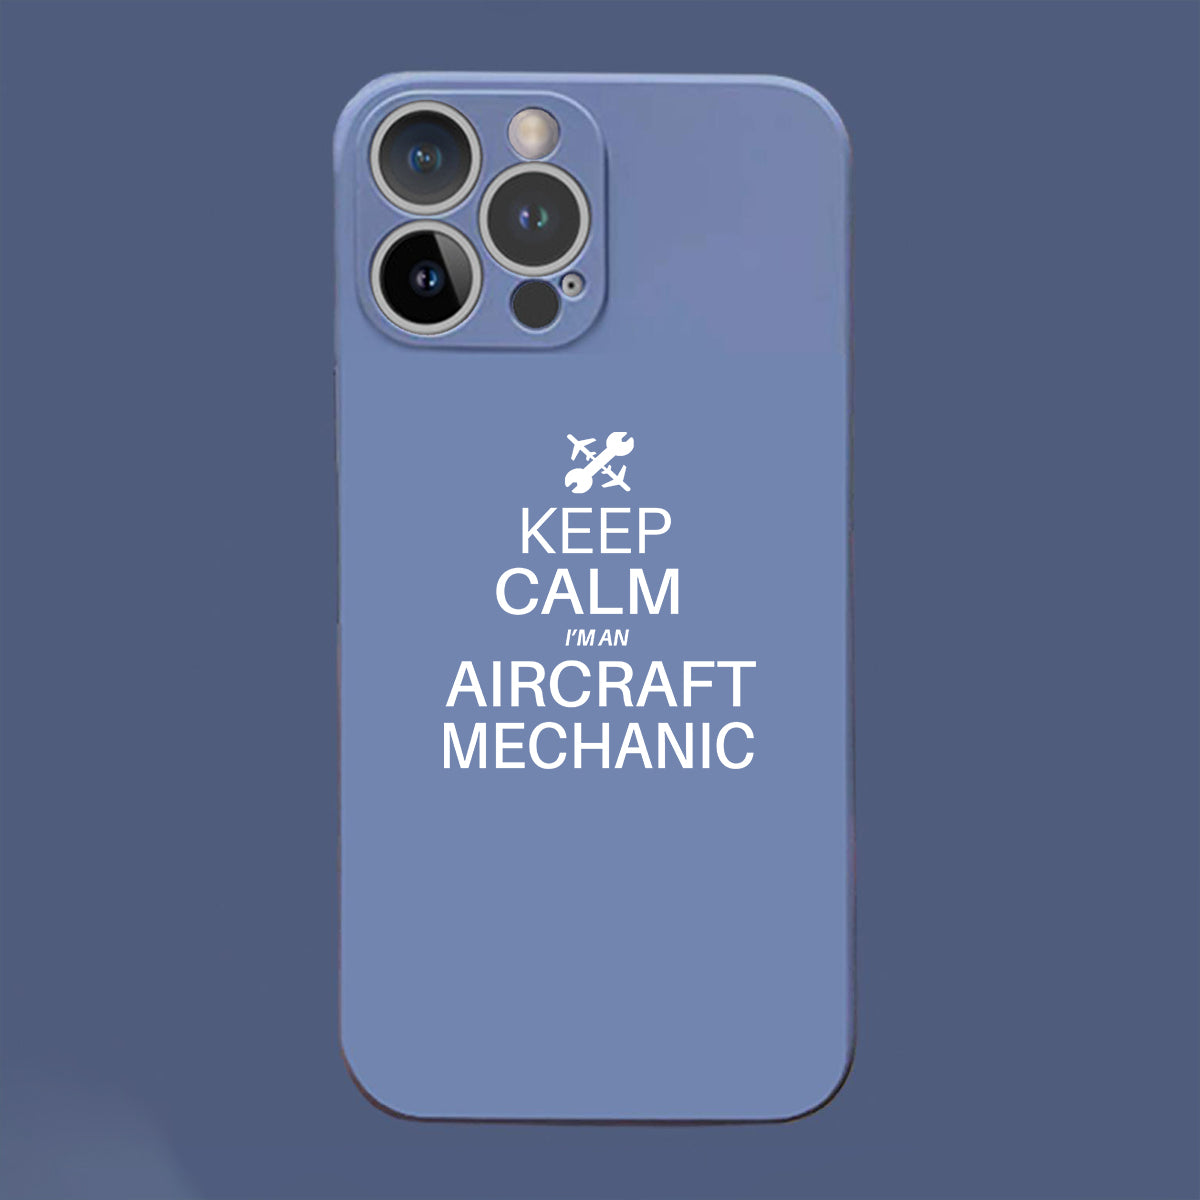 Aircraft Mechanic Designed Soft Silicone iPhone Cases